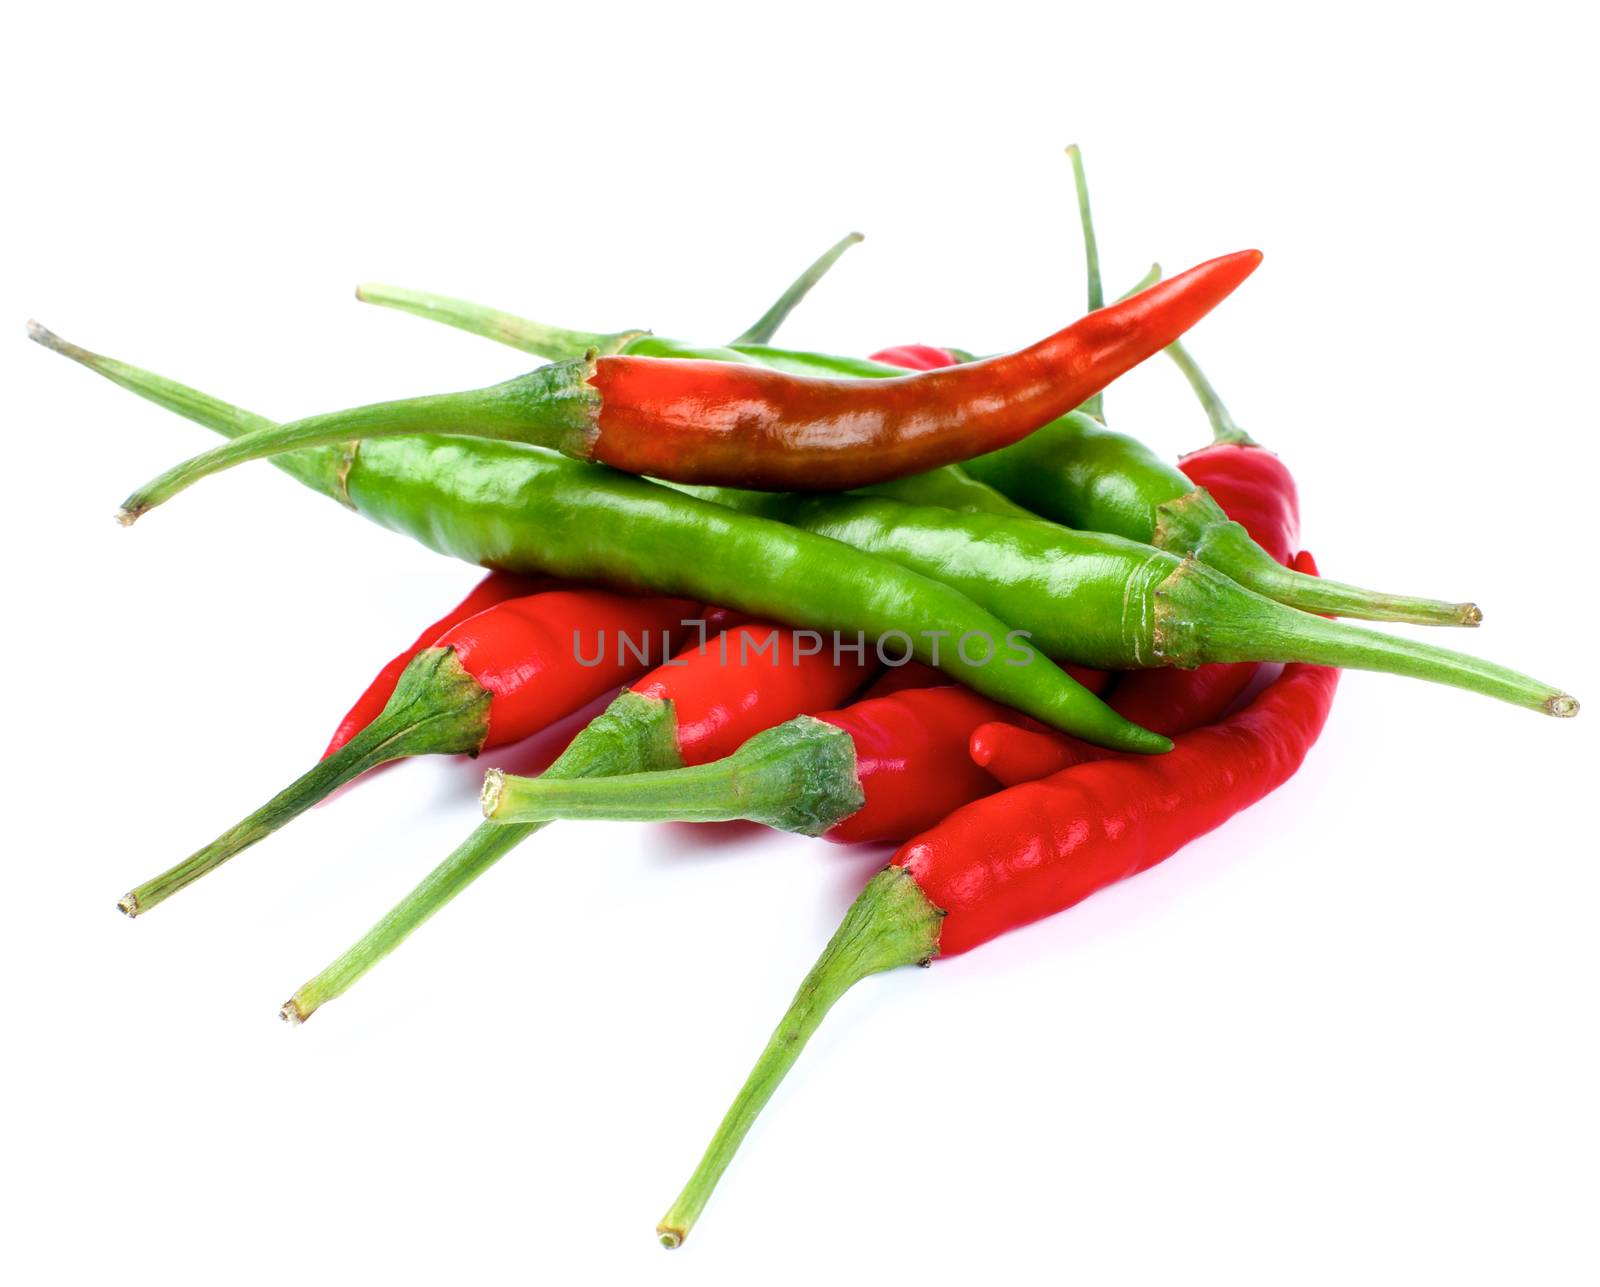 Arrangement of Perfect Red and Green Hot Chili Peppers isolated on White background